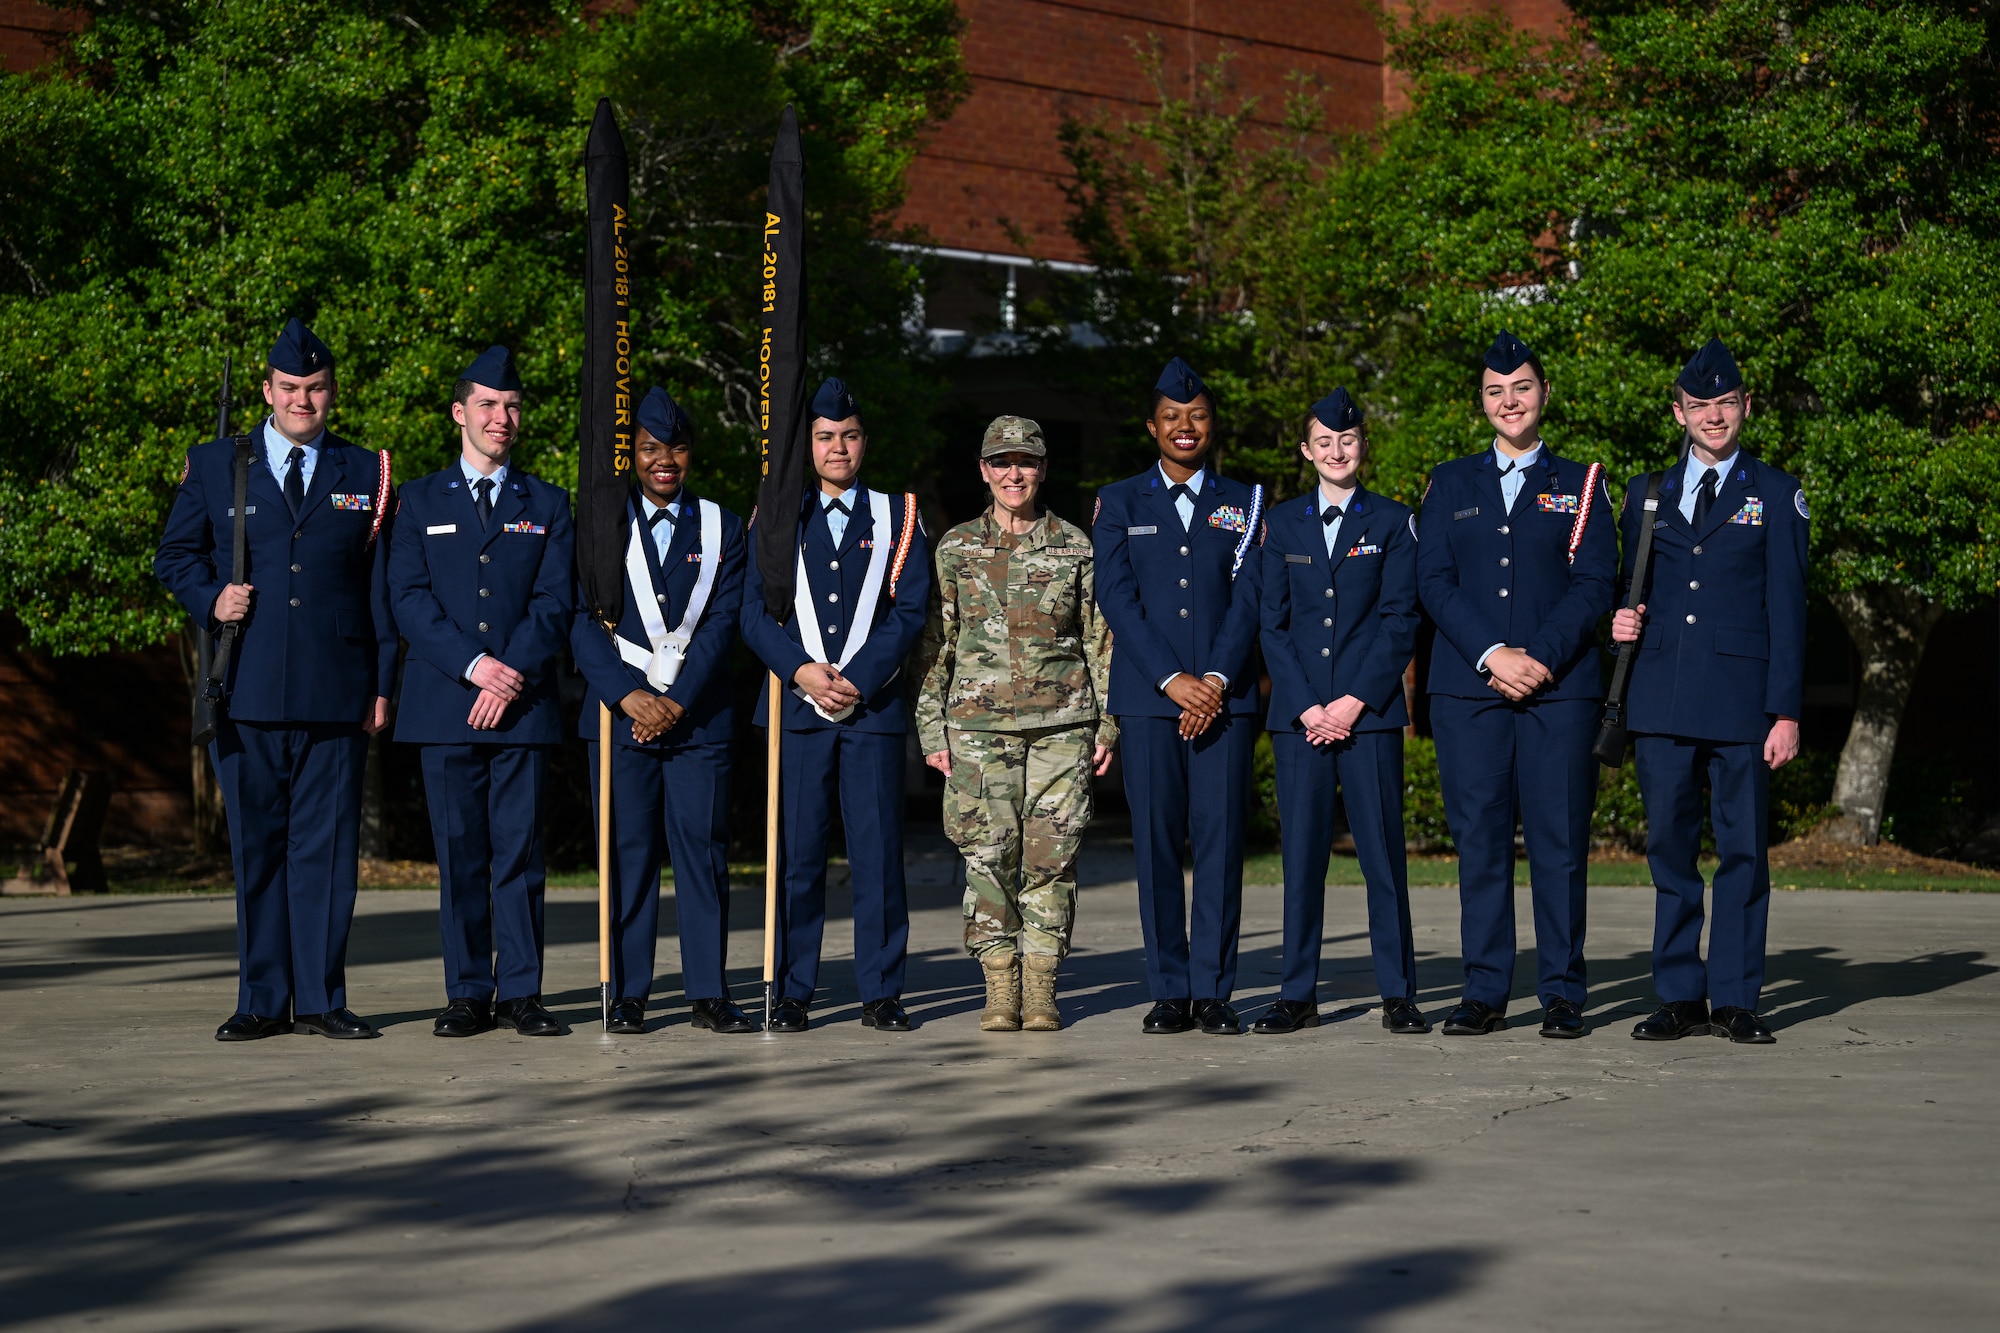 Brig. Gen. Lisa M. Craig, deputy commander, Air Force Recruiting Service, center, poses with cadets from the Hoover High School, Ala. Air Force Junior ROTC drill team